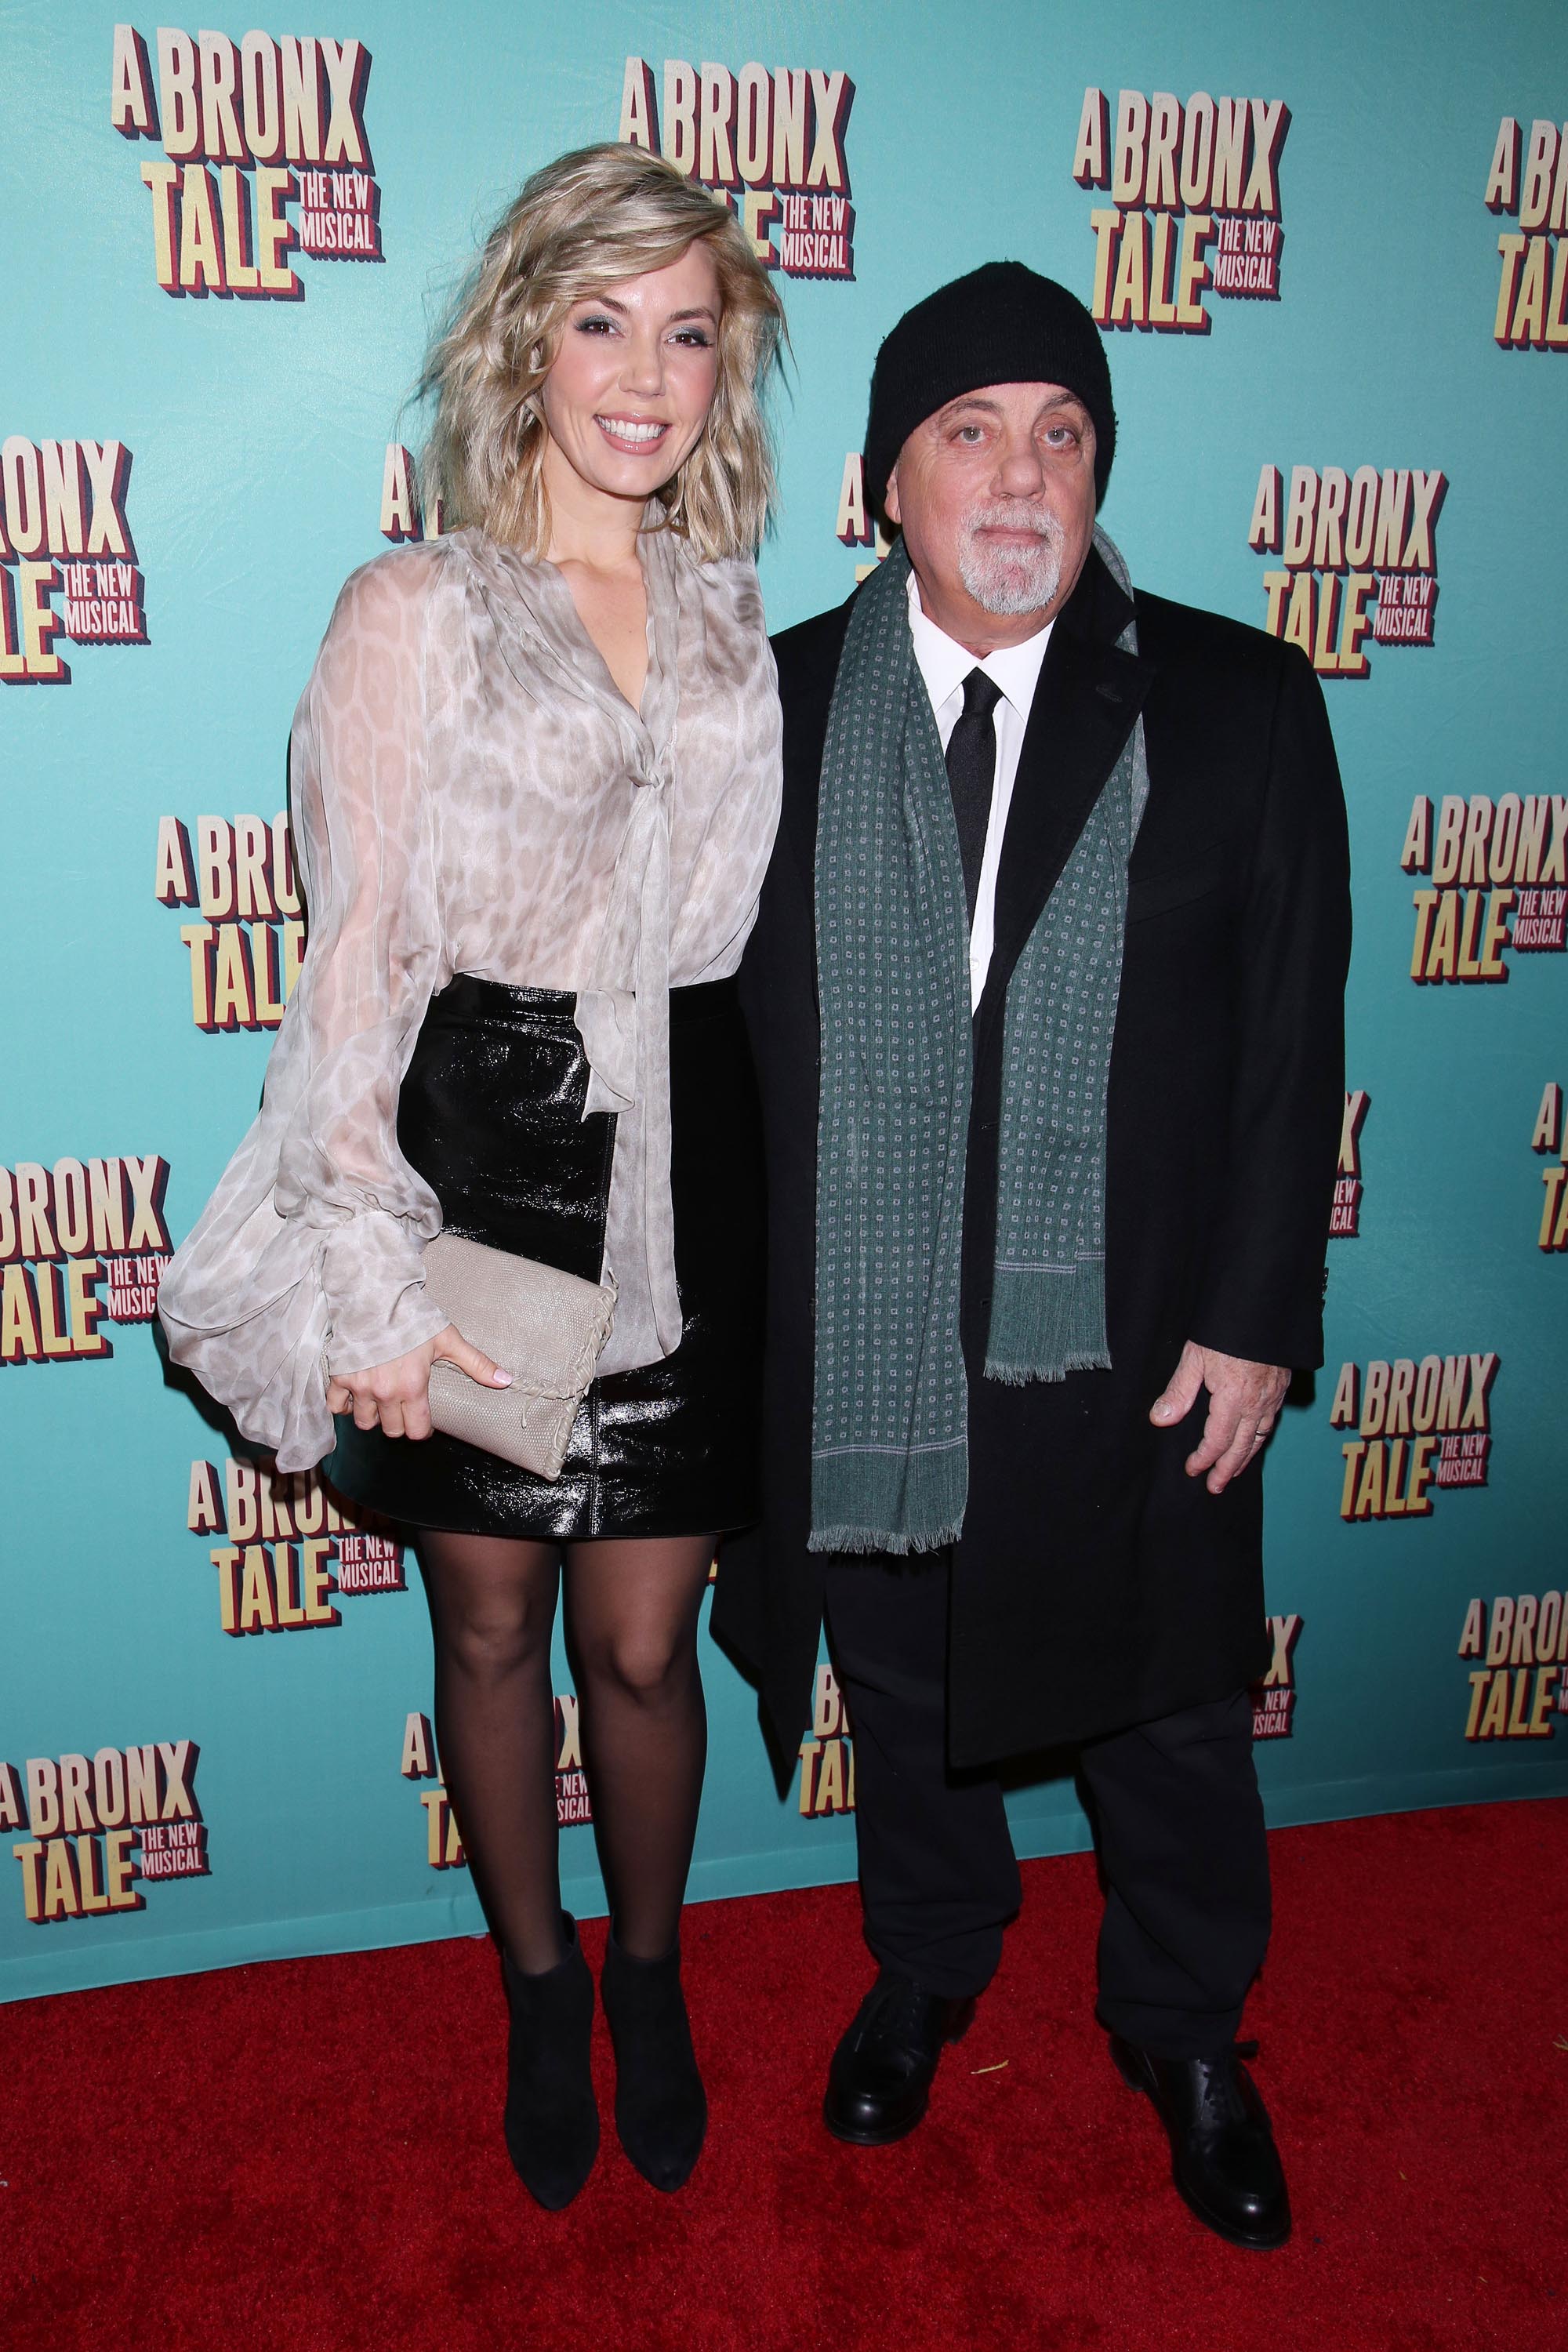 Alexis Roderick opening night of A Bronx Tale